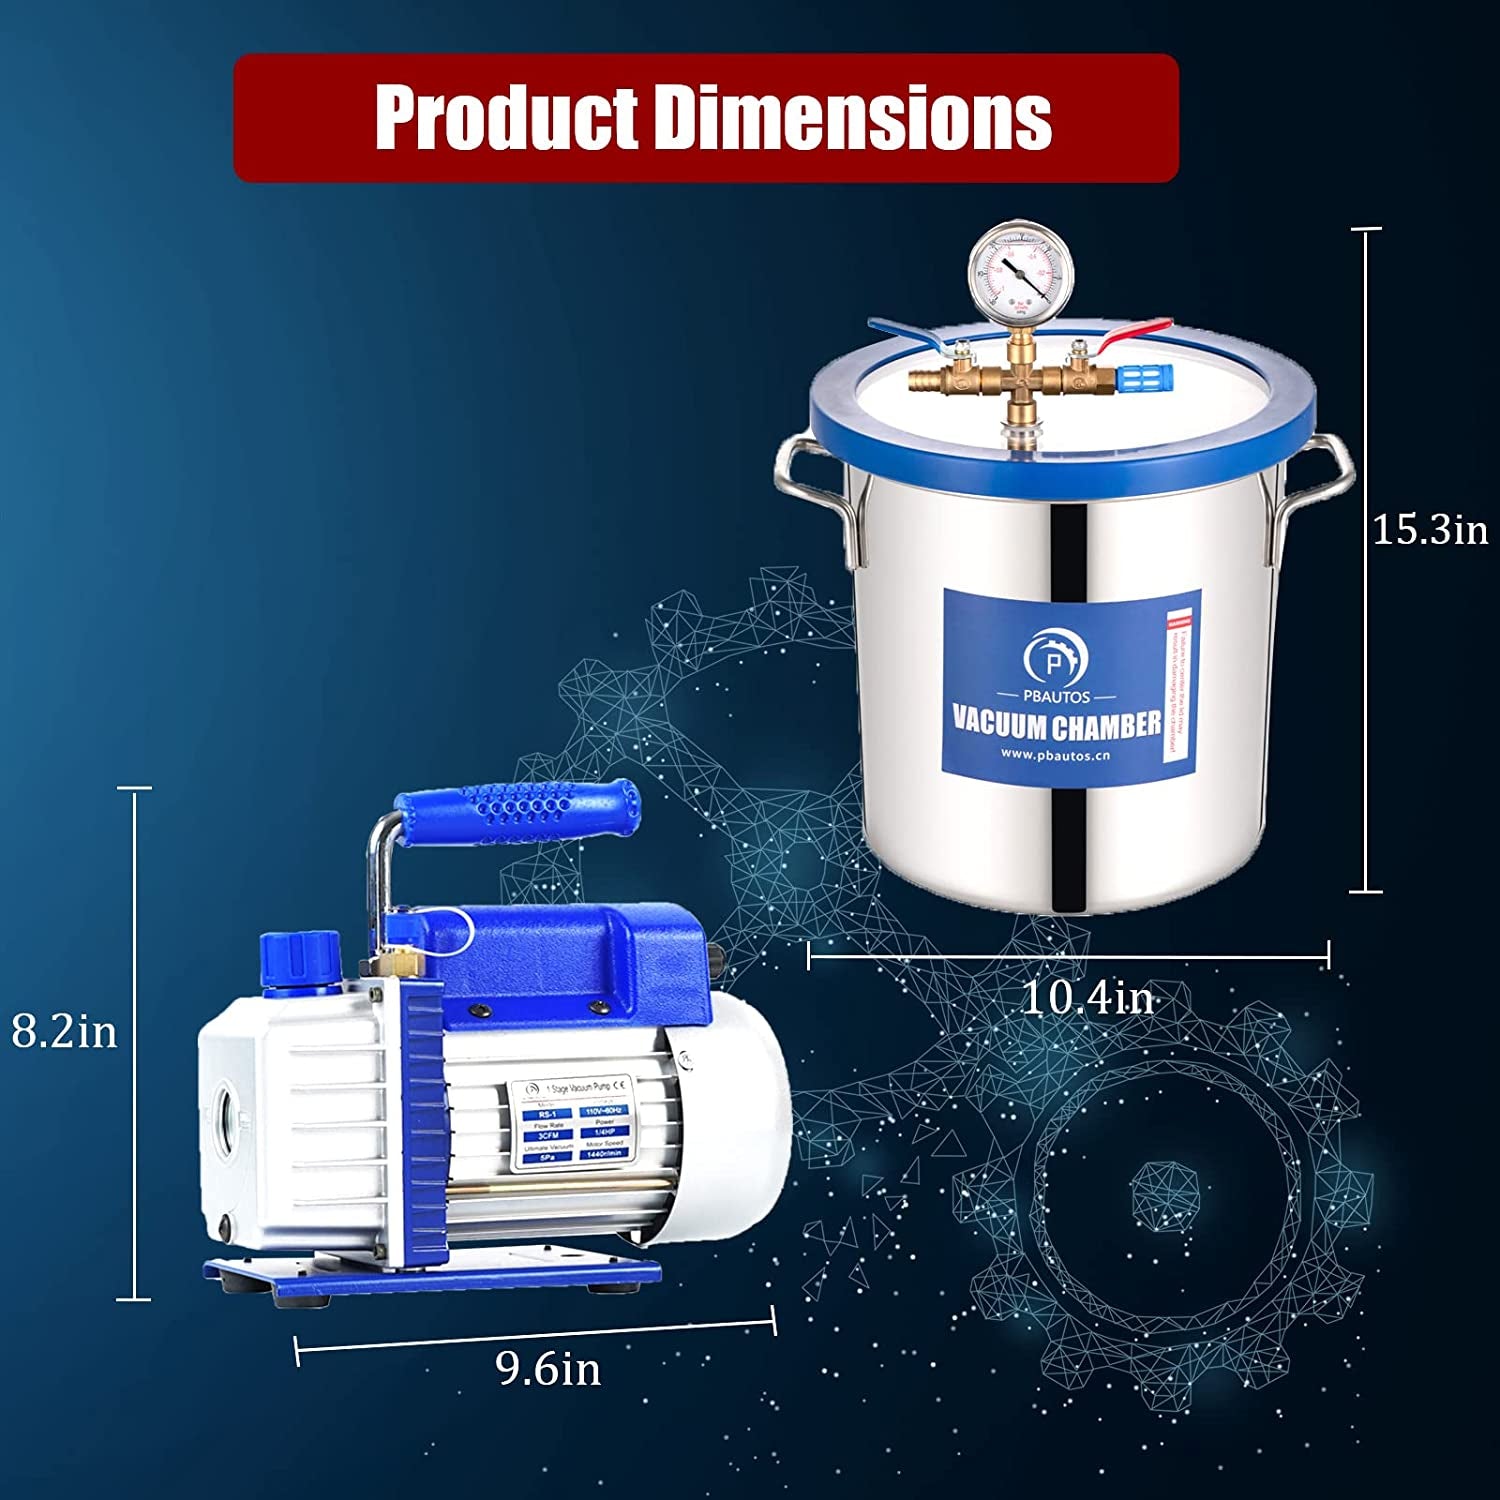 3 Gallon Vacuum Chamber with Pump, Stainless Steel Vacuum Chamber and 3CFM Vacuum Pump, Vacuum Degassing Chamber Kit with Tempered Glass Lid, Perfect for Resin, Wood Stabilizing, No Oil Included